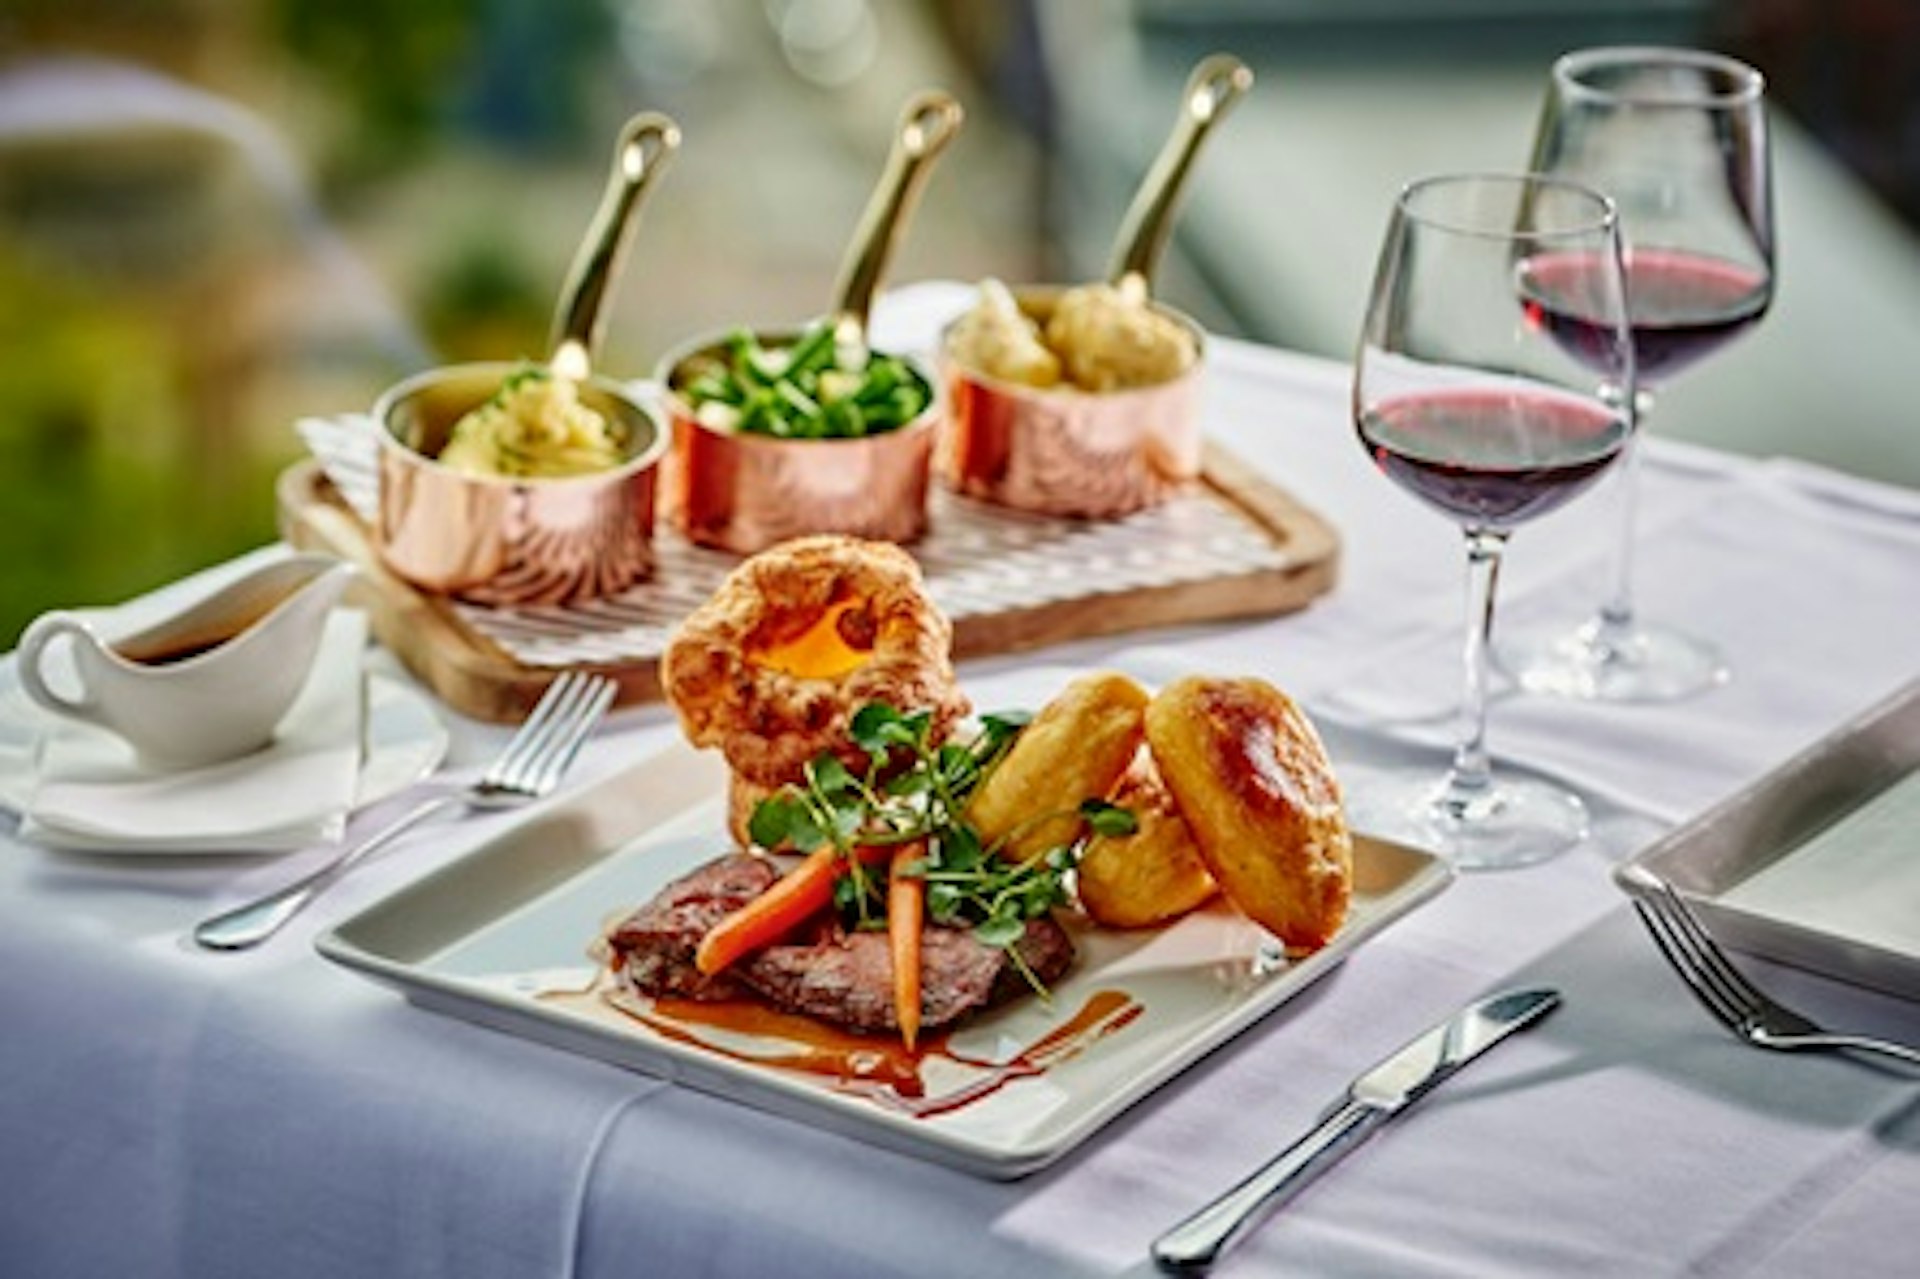 Three Course Sunday Lunch and Bottle of Wine for Two at the Village Brasserie by Velvet, Manchester 1